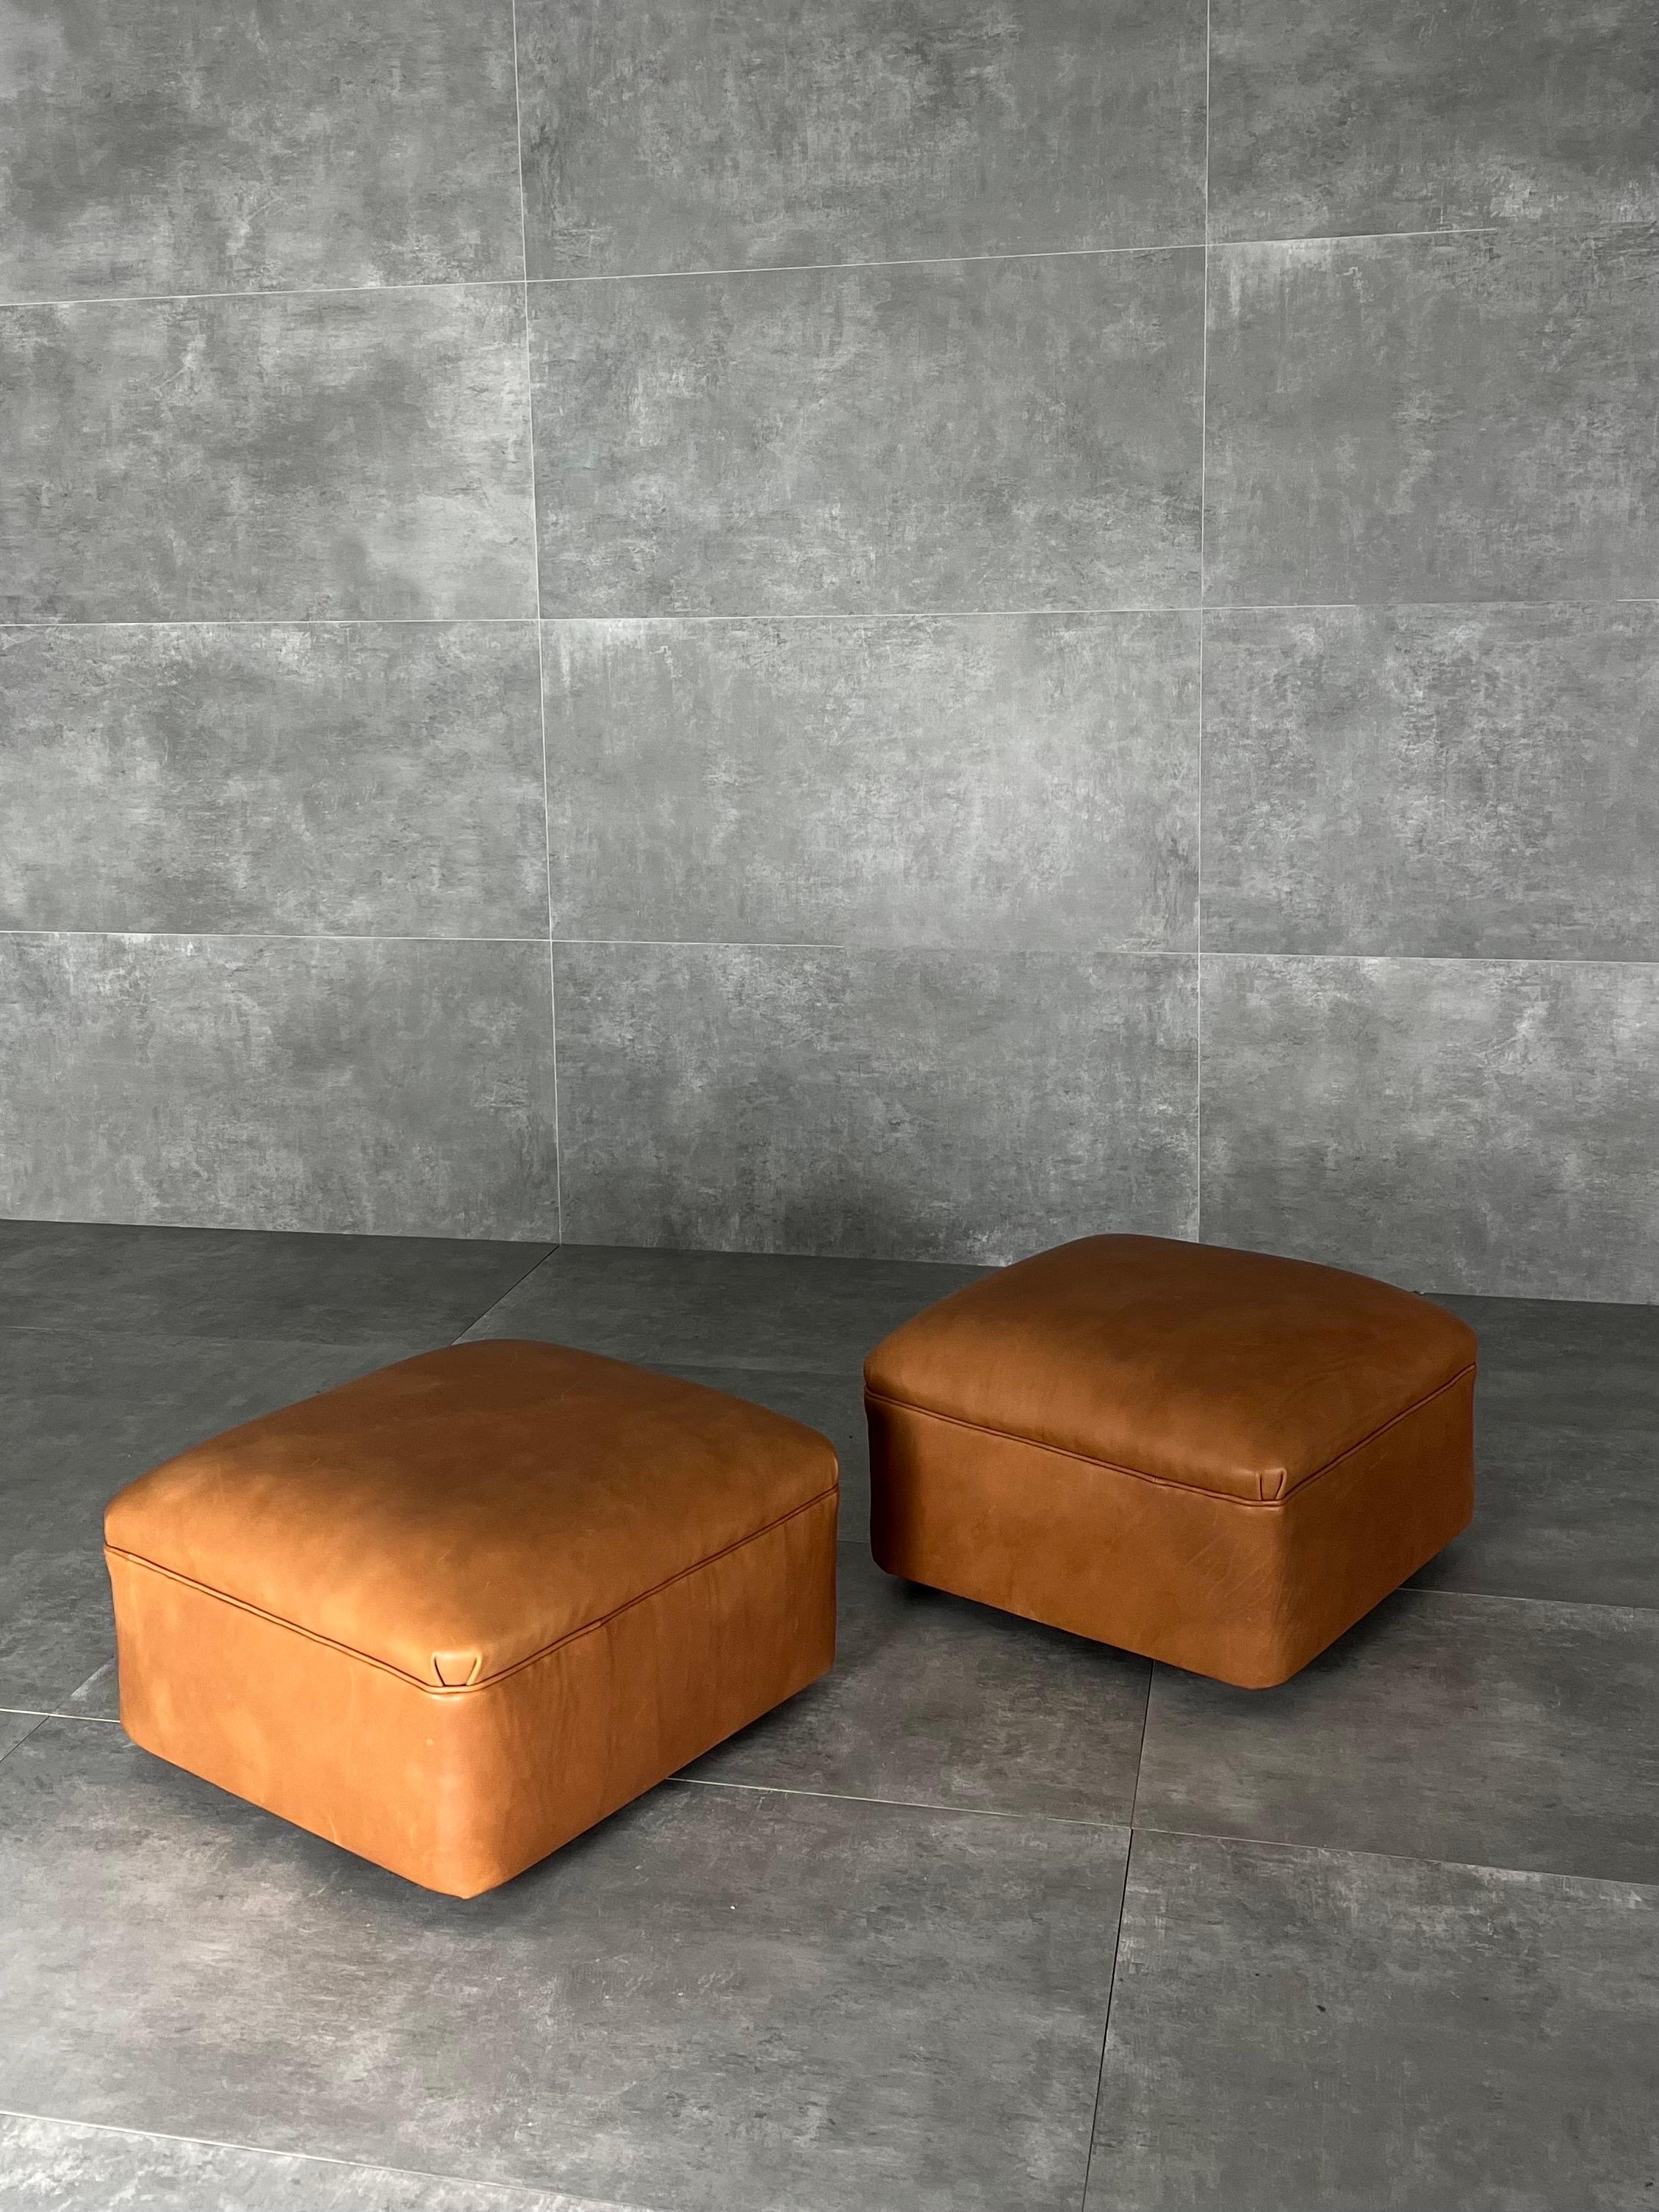 1960s ottomans with squared shape. They features a new cognac leather reupholster and small wheels on the base which give stability while used.